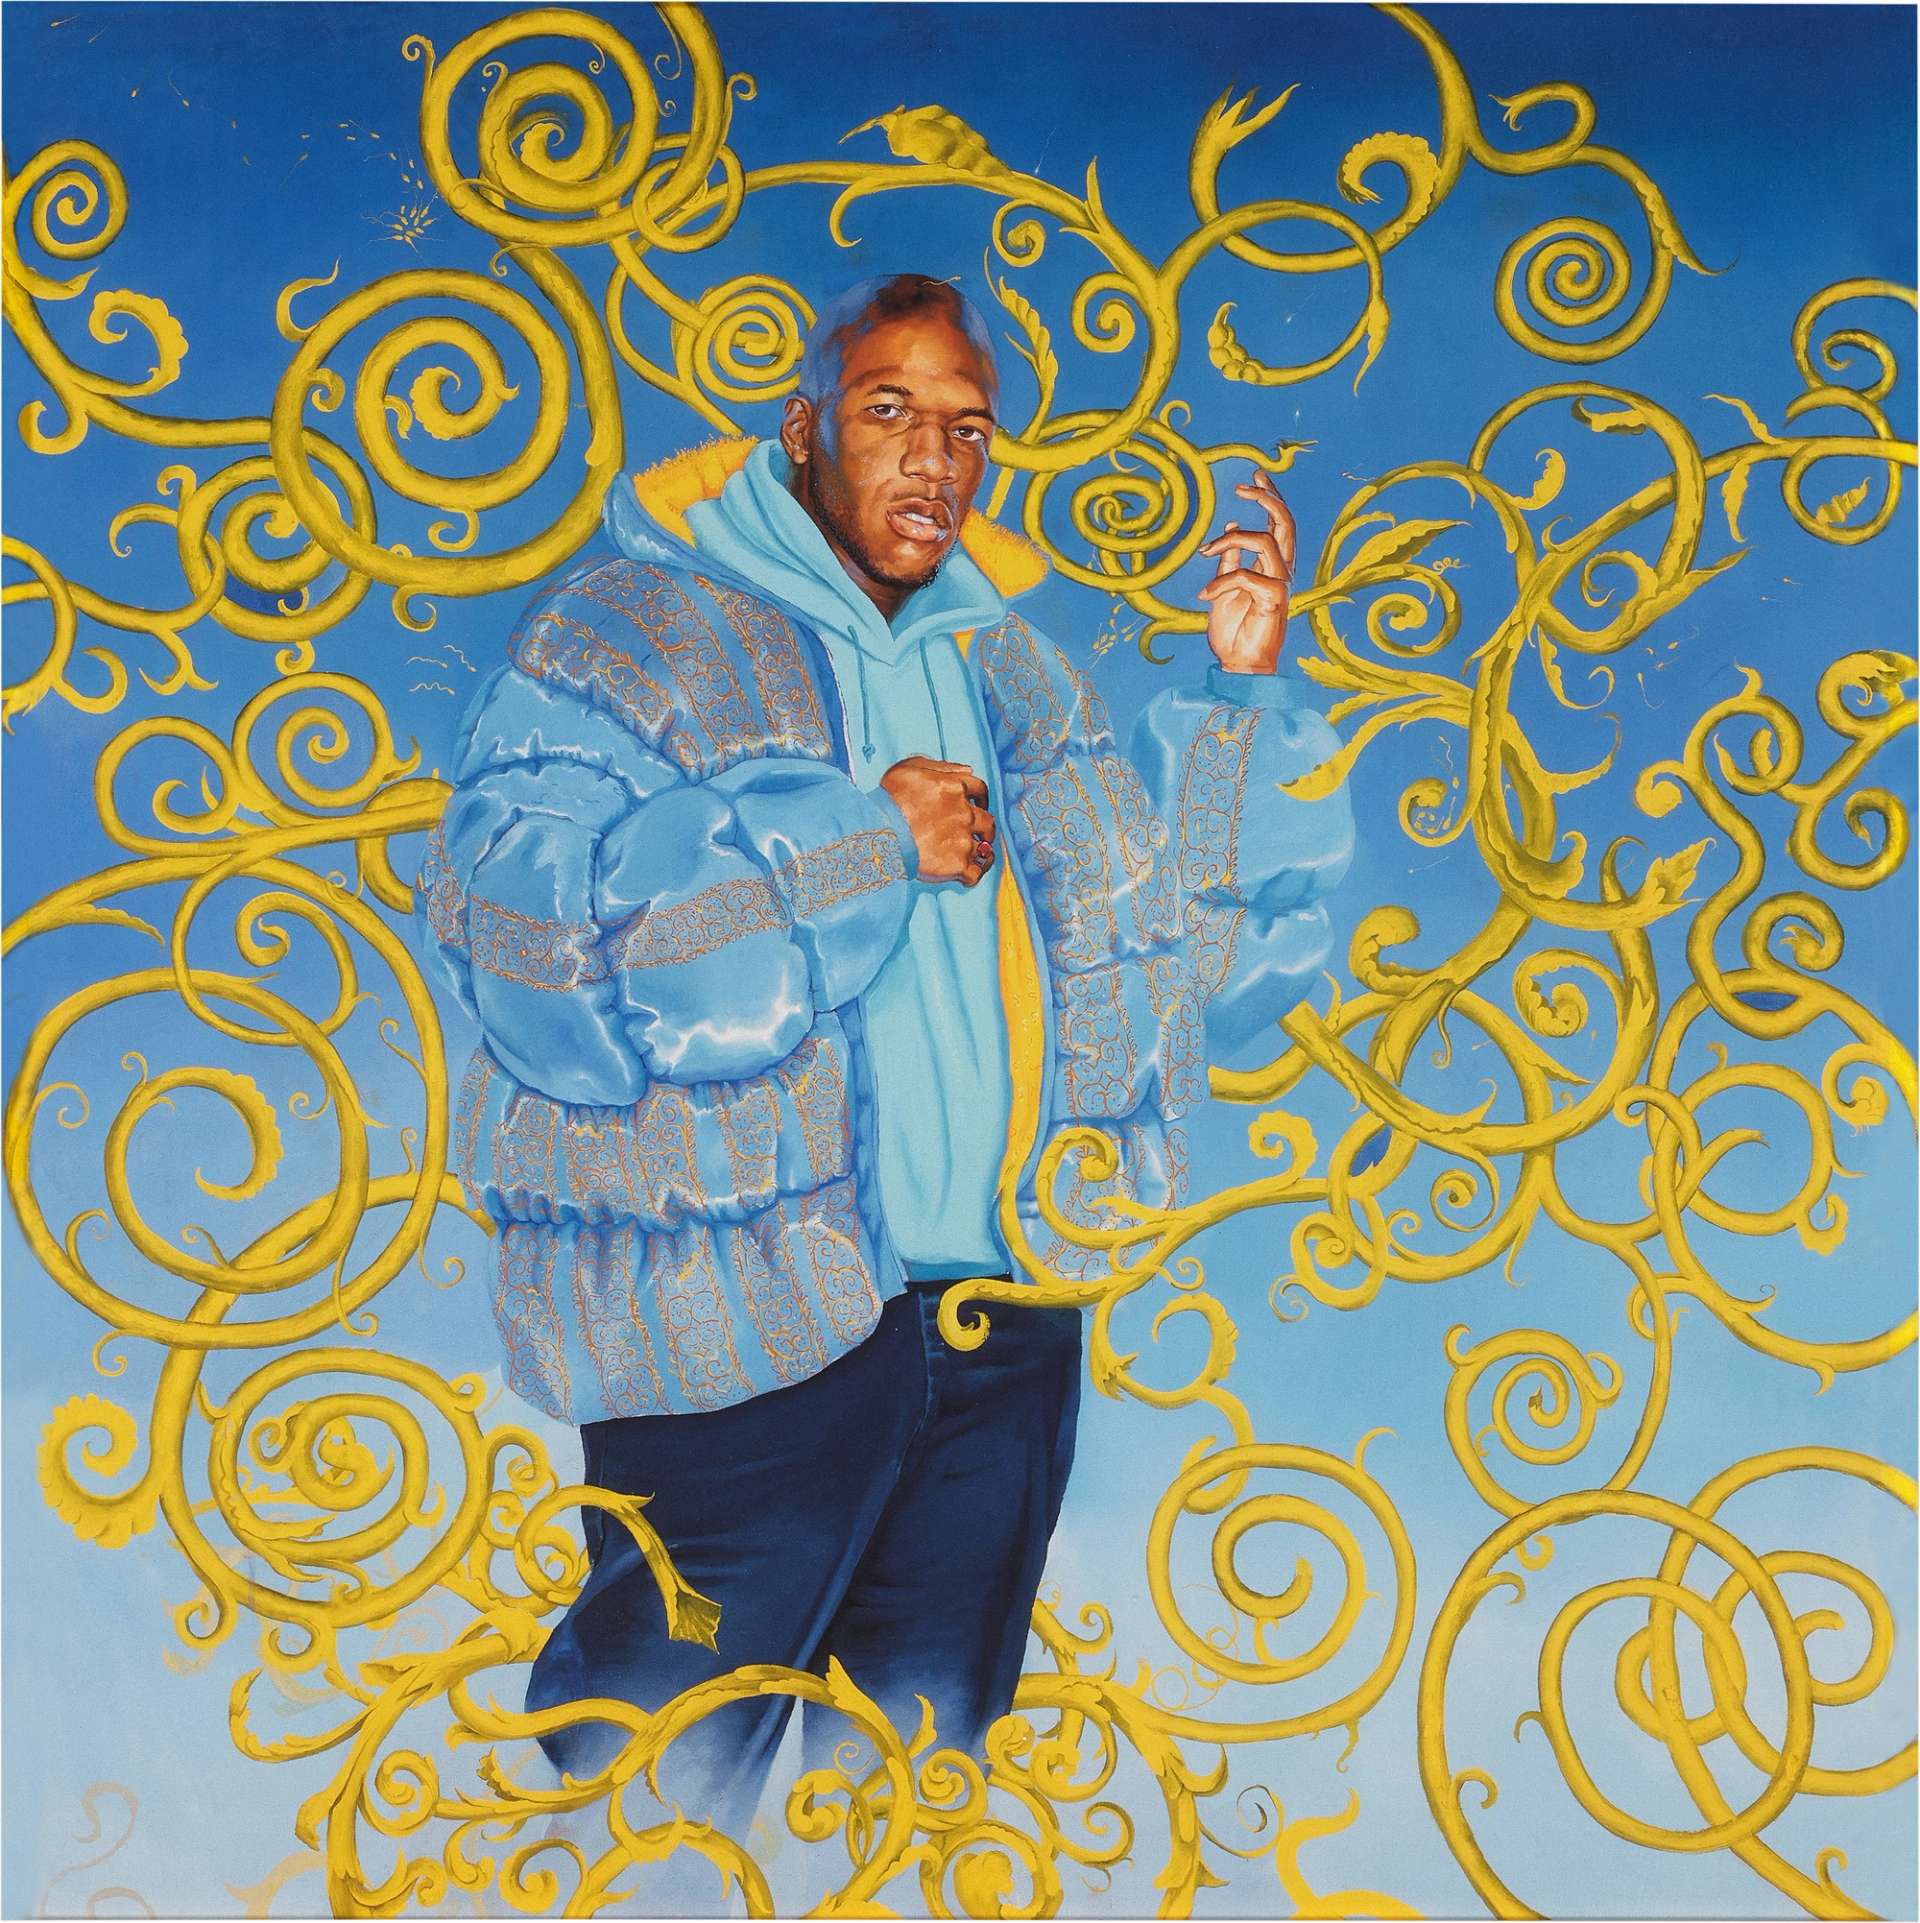 Kehinde Wiley: Redefining Portraiture Through Symbolism and Subversion